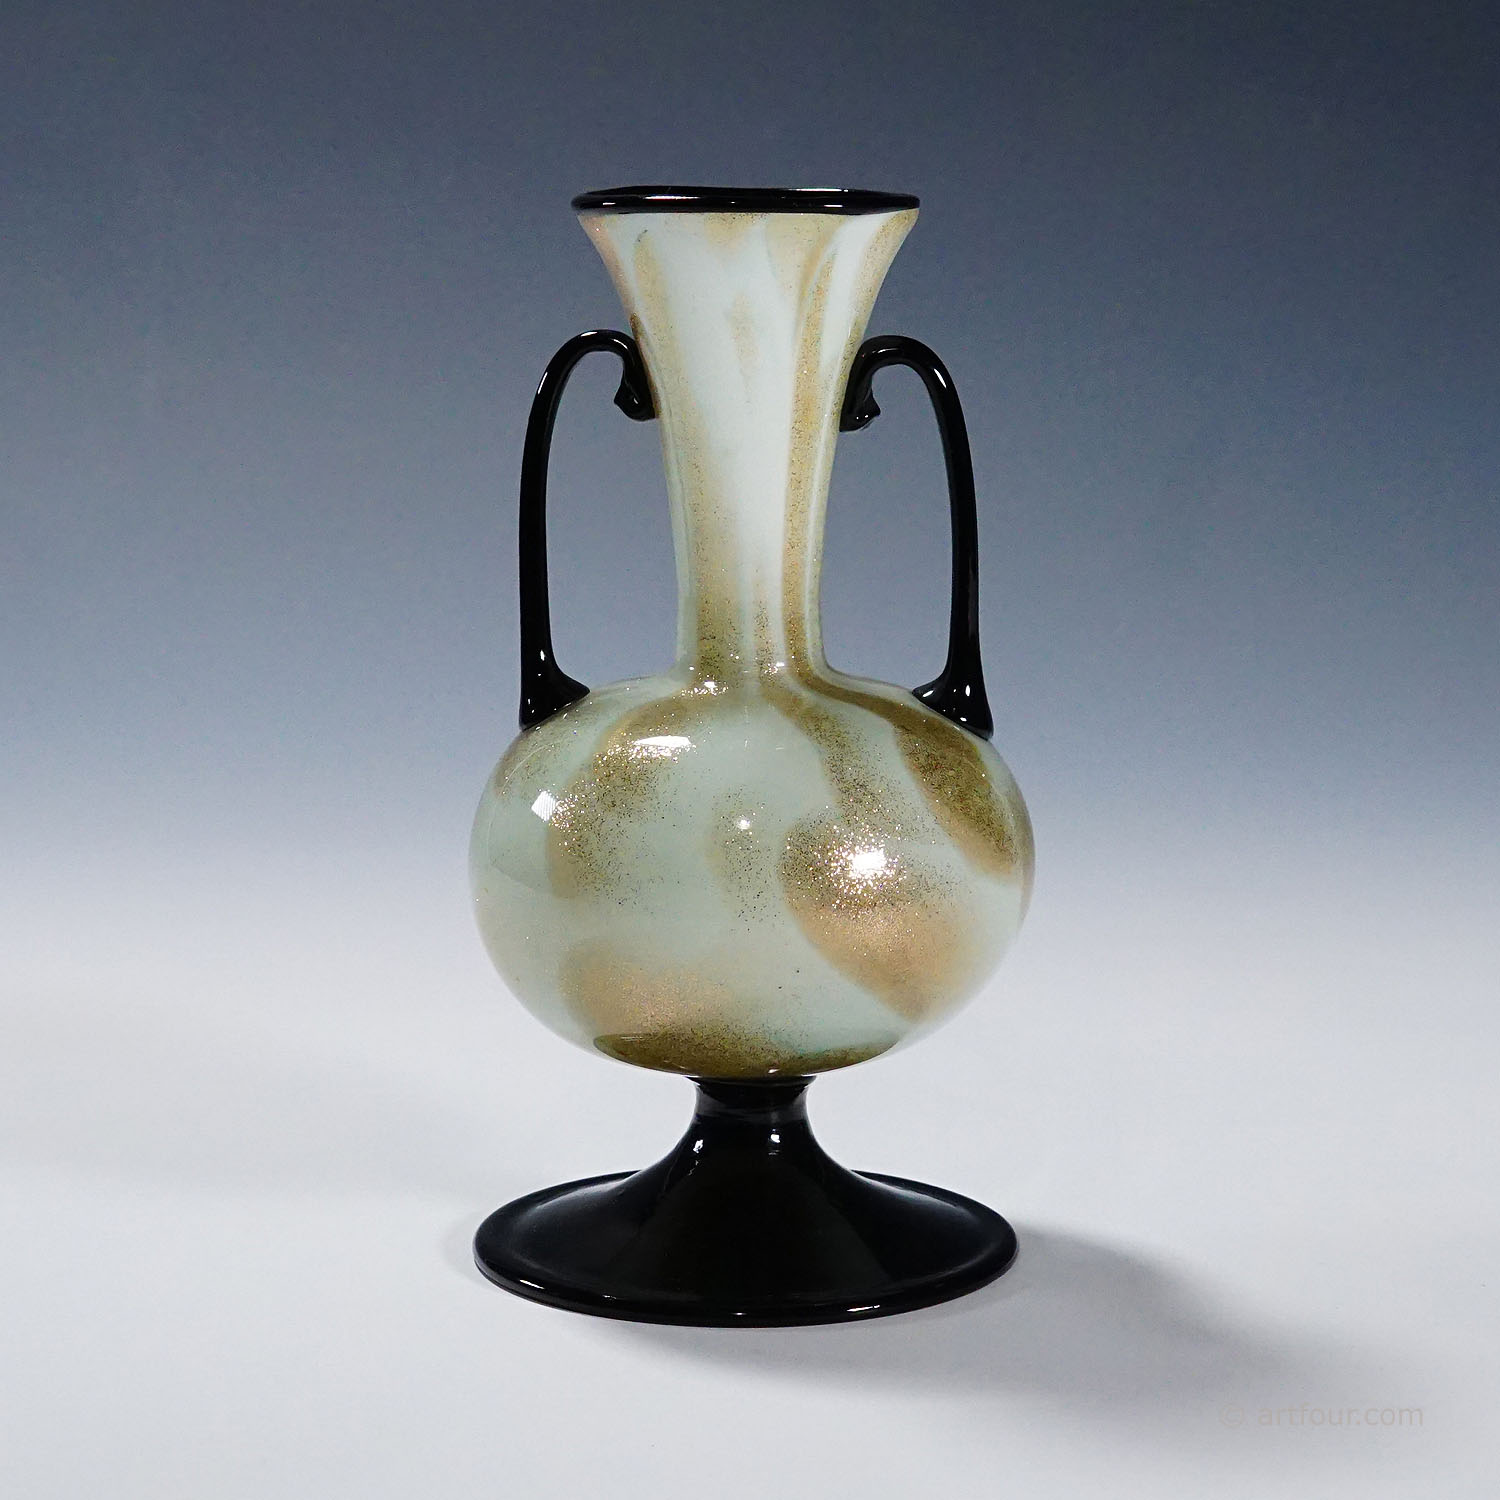 A Soffiato Glass Vase with Aventurine by Fratelli Toso (attr.), Murano ca. 1930s